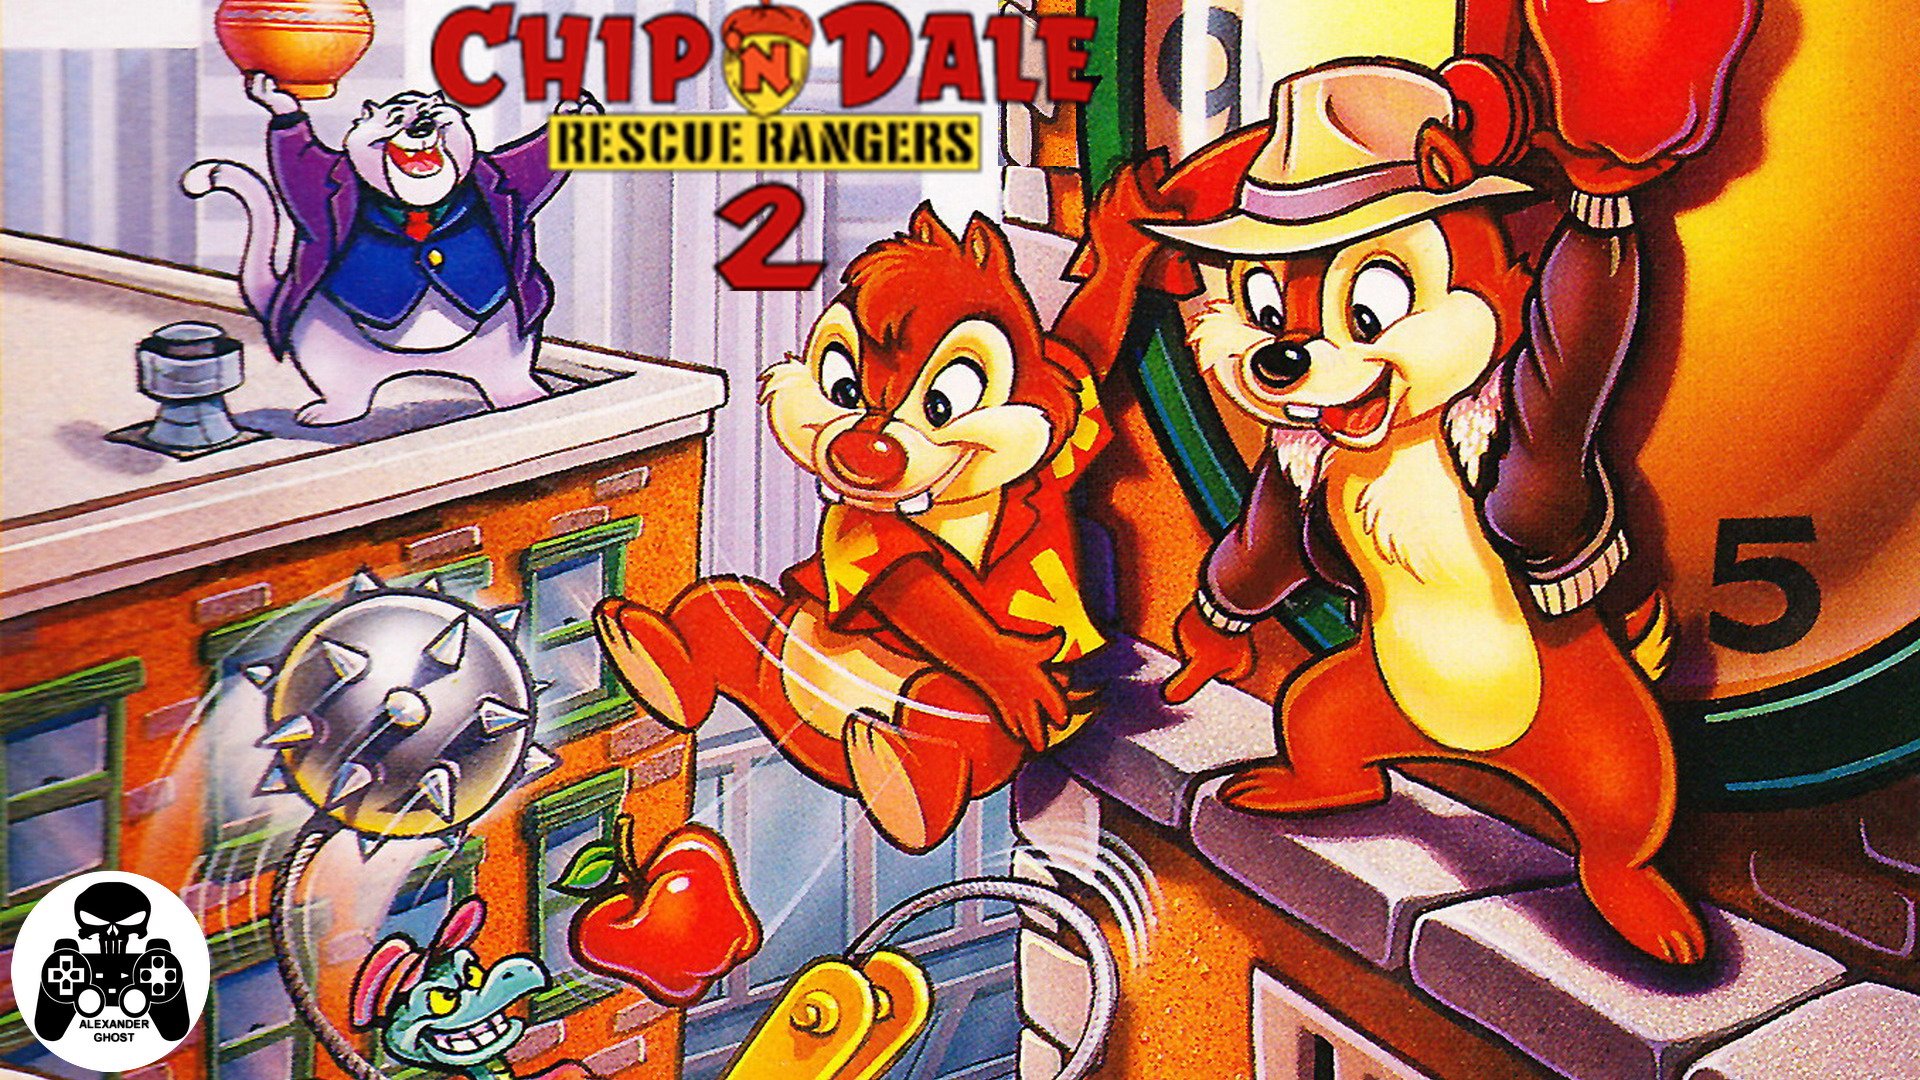 Chip and dale 2. Chip ’n Dale Rescue Rangers 2. Chip 'n Dale Rescue Rangers 2 Dendy. Чип и Дейл 1 Денди. Чип и Дейл 2 NES.